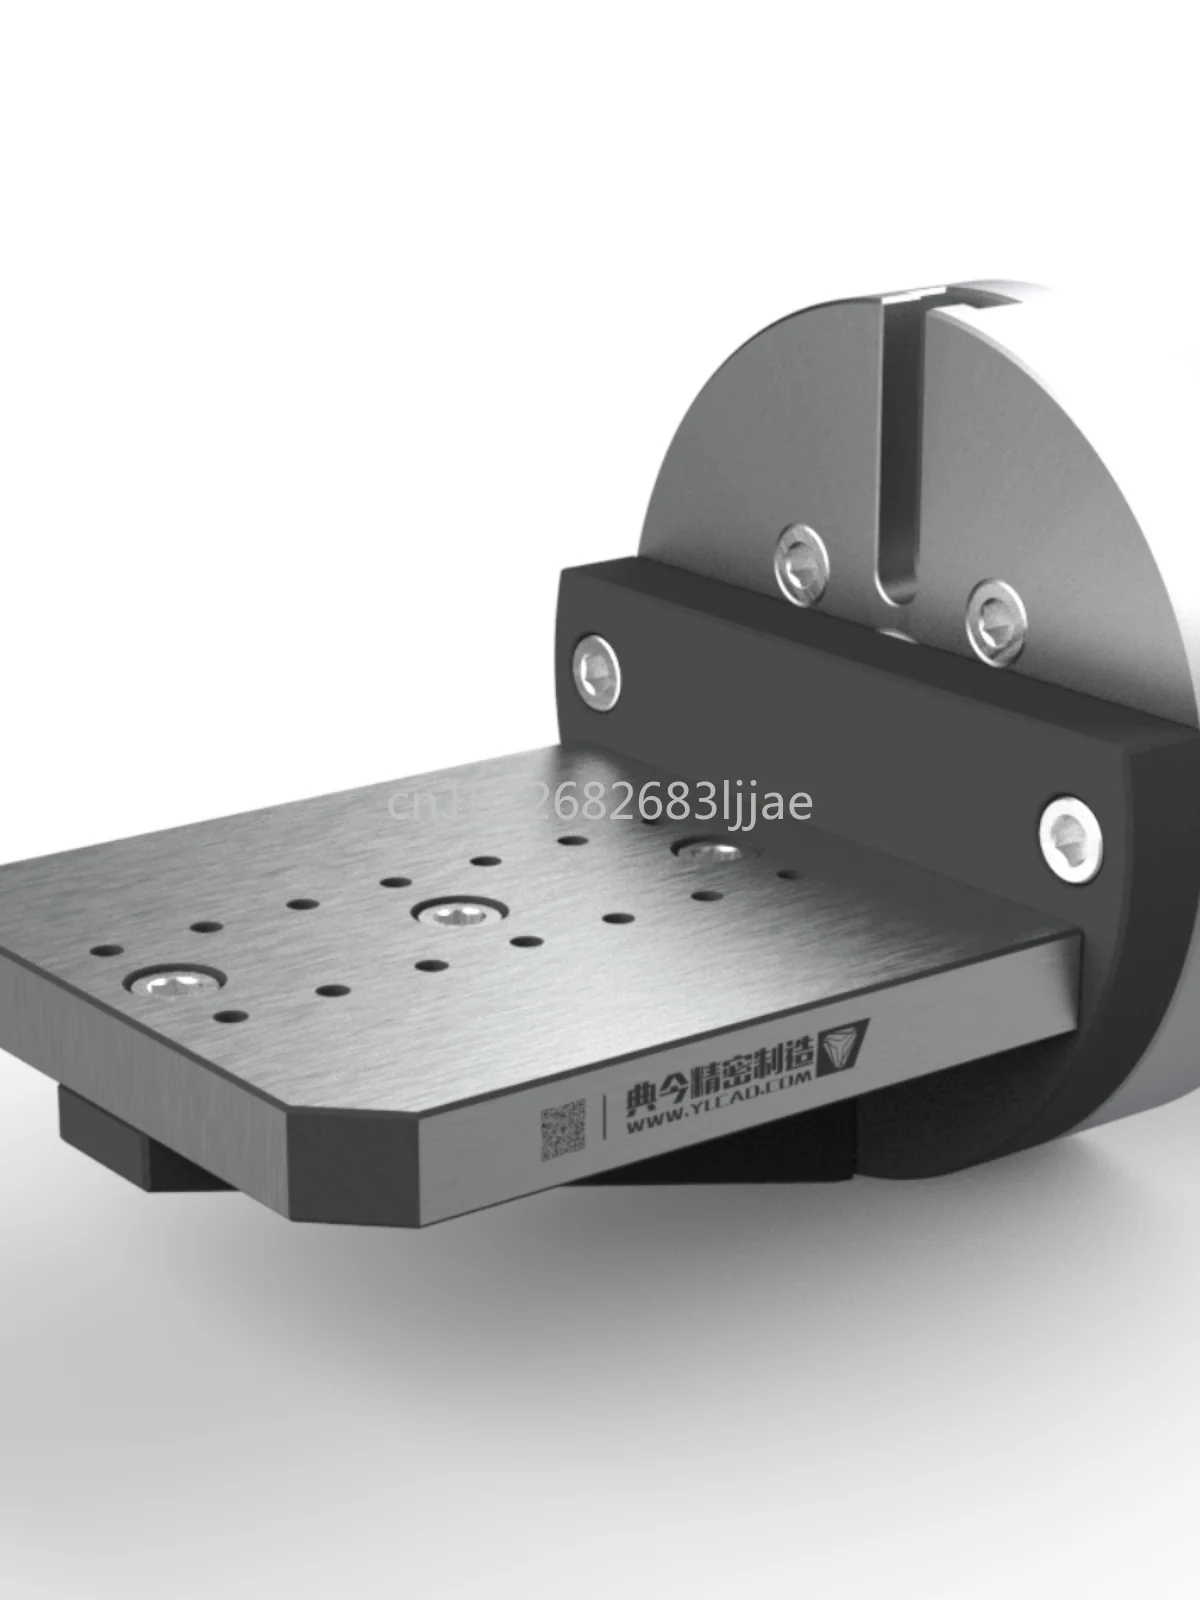 

170-200-255 Four-Axis Lengthened L-Shaped Block Single-Side L-Shaped Block Four-Axis Single-Side Bridge Plates